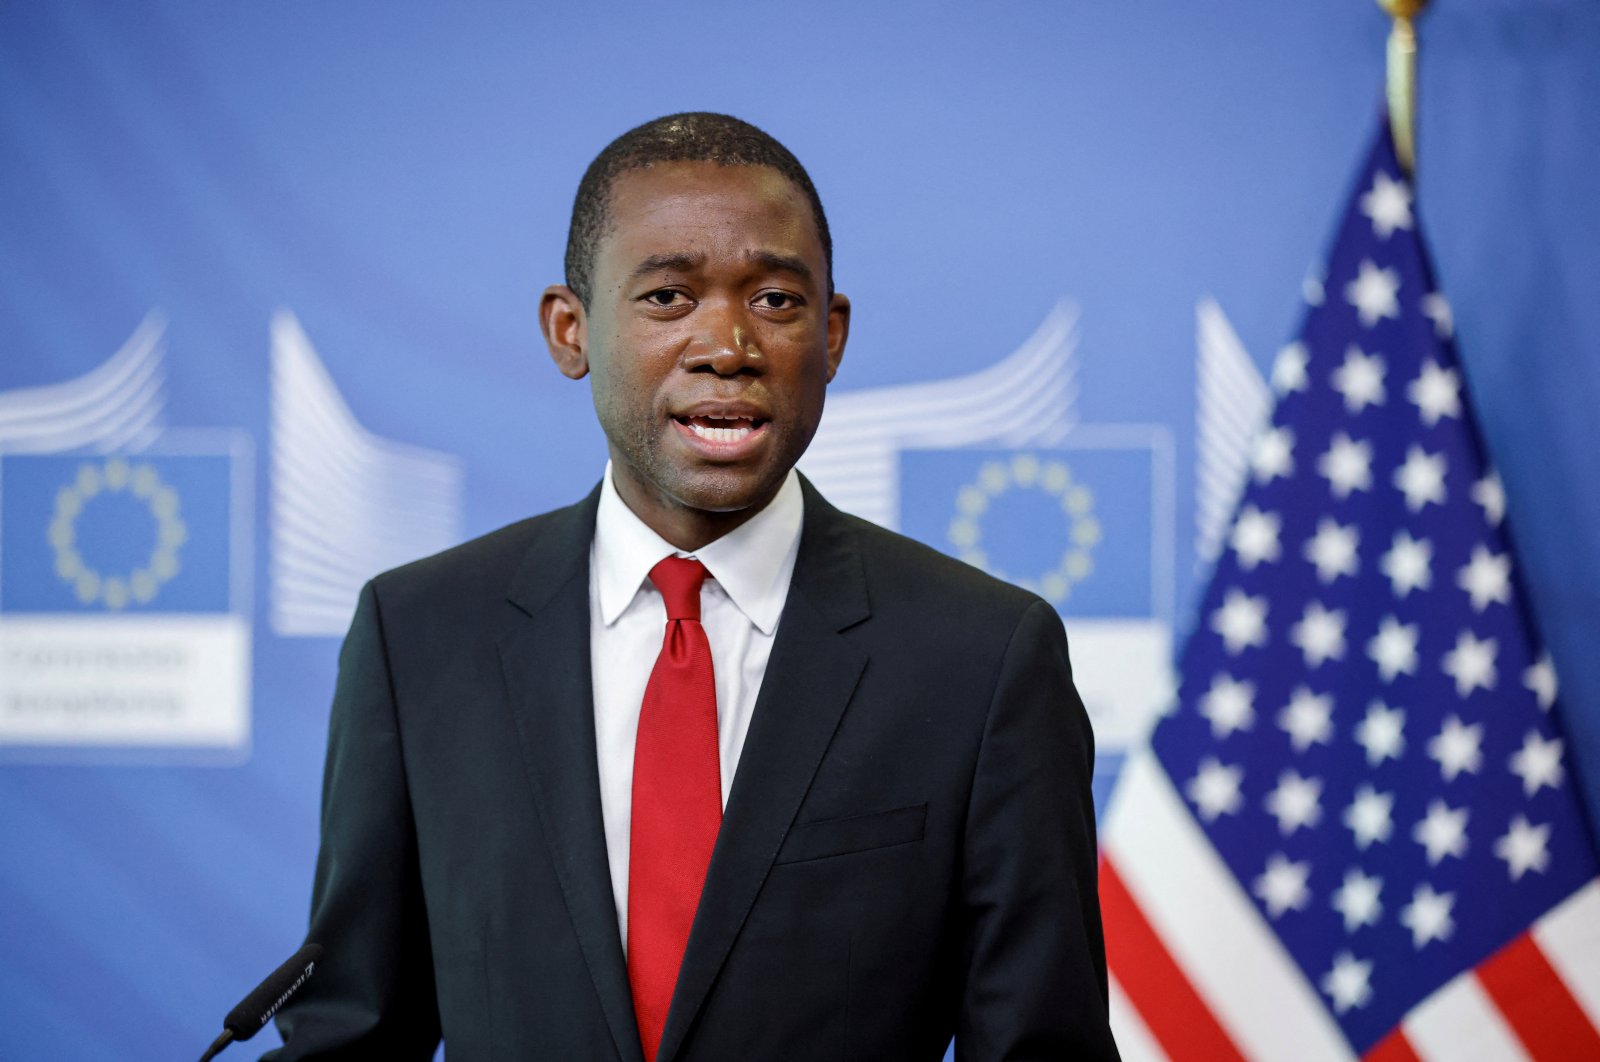 U.S. Deputy Treasury Secretary Wally Adeyemo speaks during a joint news conference with EU Commissioner McGuinness (not pictured) in Brussels, Belgium, March 29, 2022. (Reuters Photo)